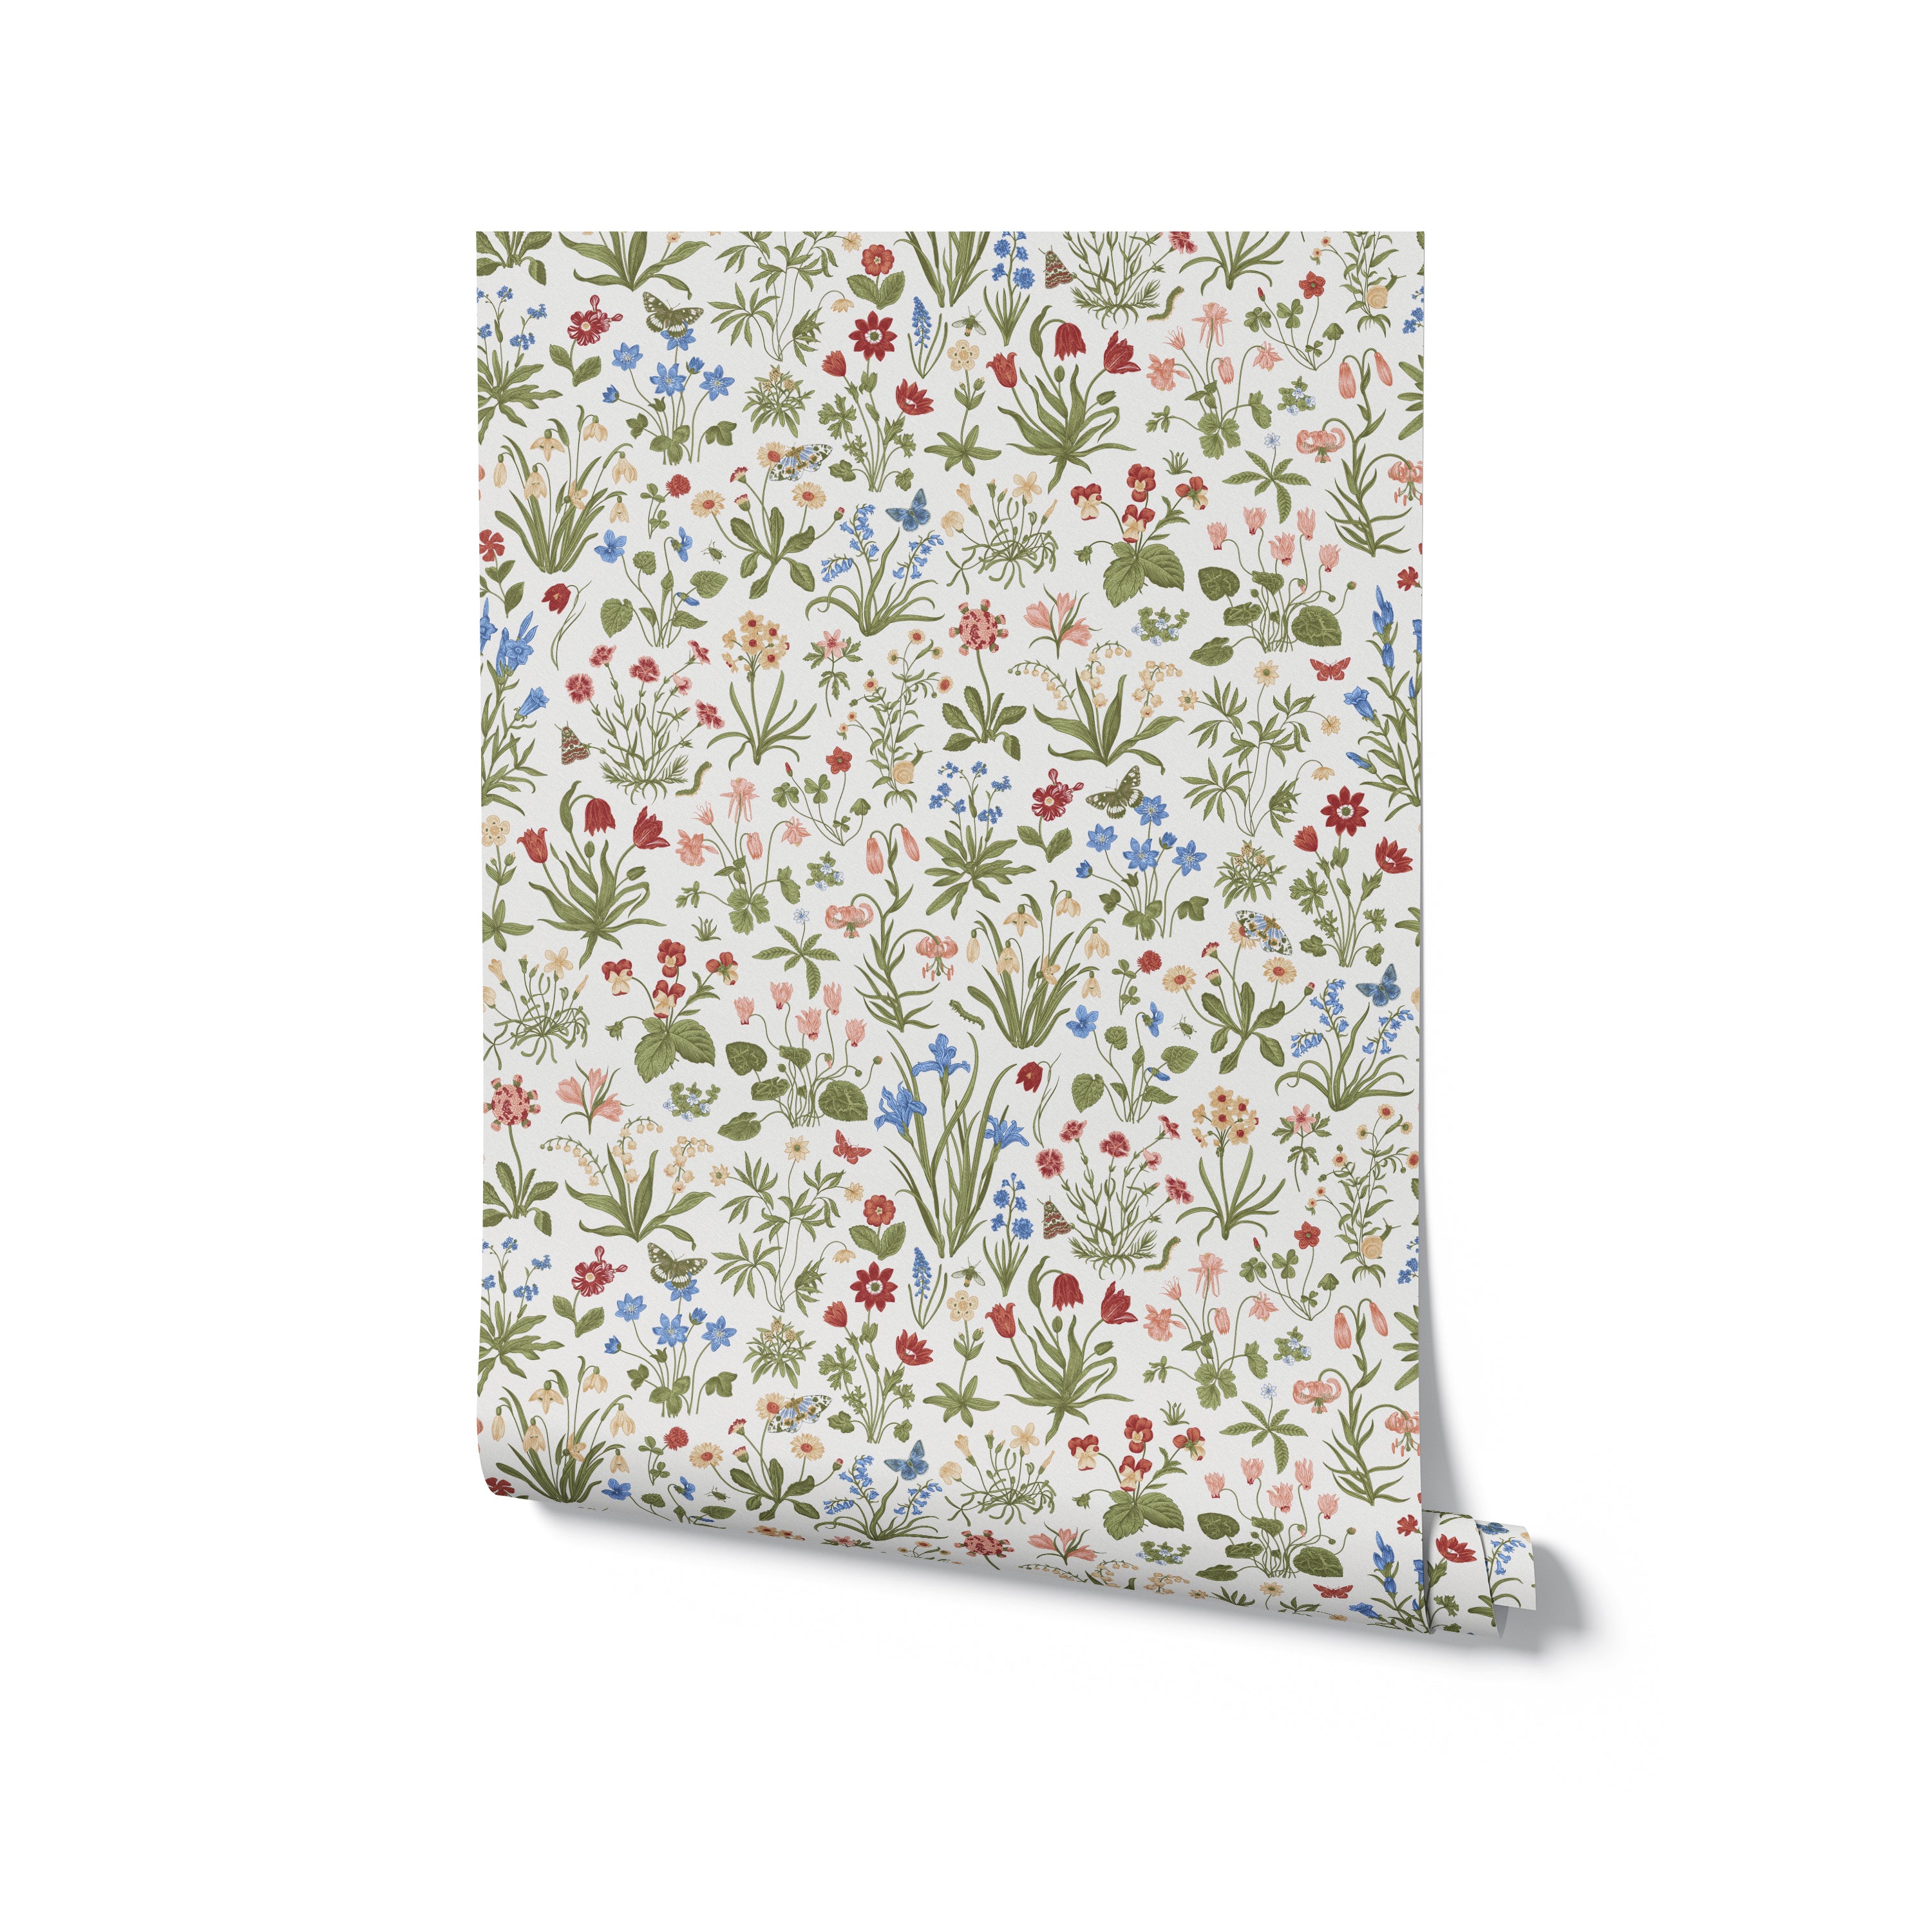 Rolled-up 'Garden Fantasy Wallpaper' depicting a detailed and colorful floral pattern with a variety of wildflowers. The design features a rich array of colors on a soft background, perfect for enhancing home interiors with a touch of nature's charm.